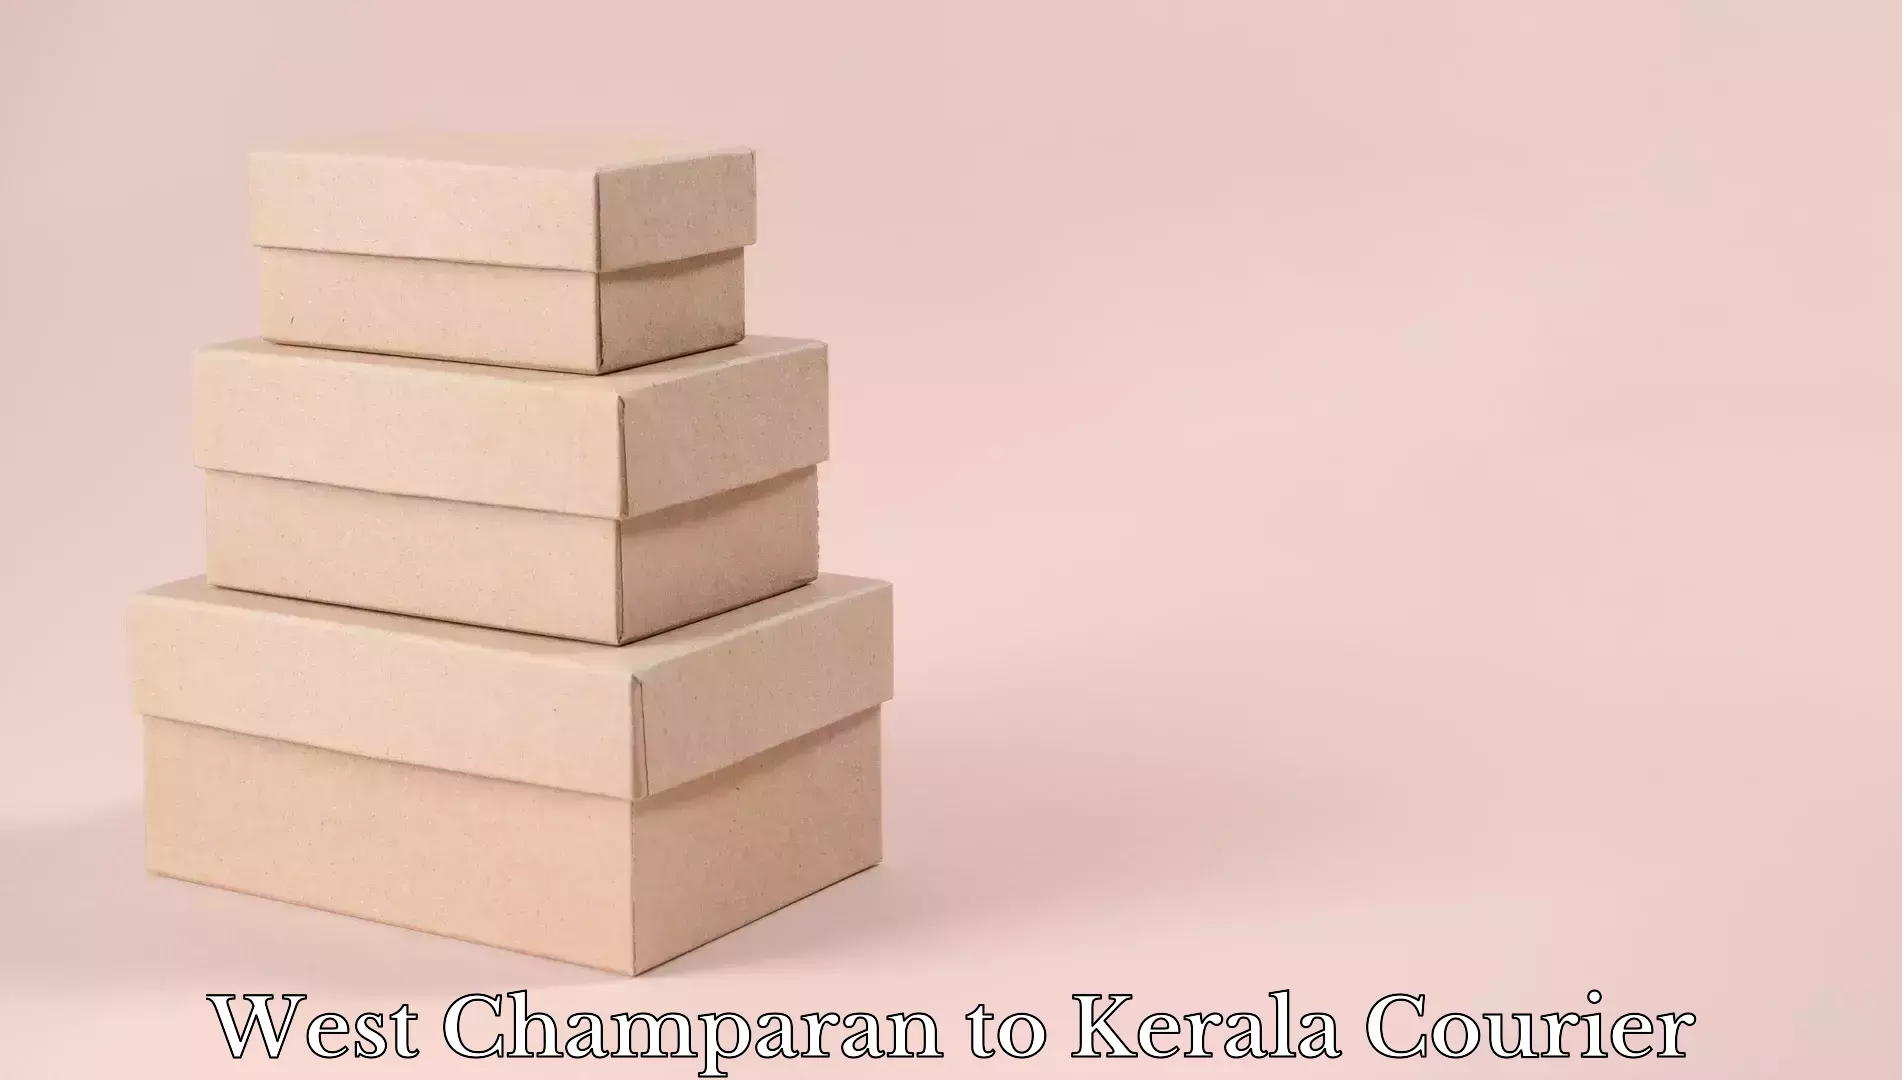 Luggage delivery app West Champaran to Kerala